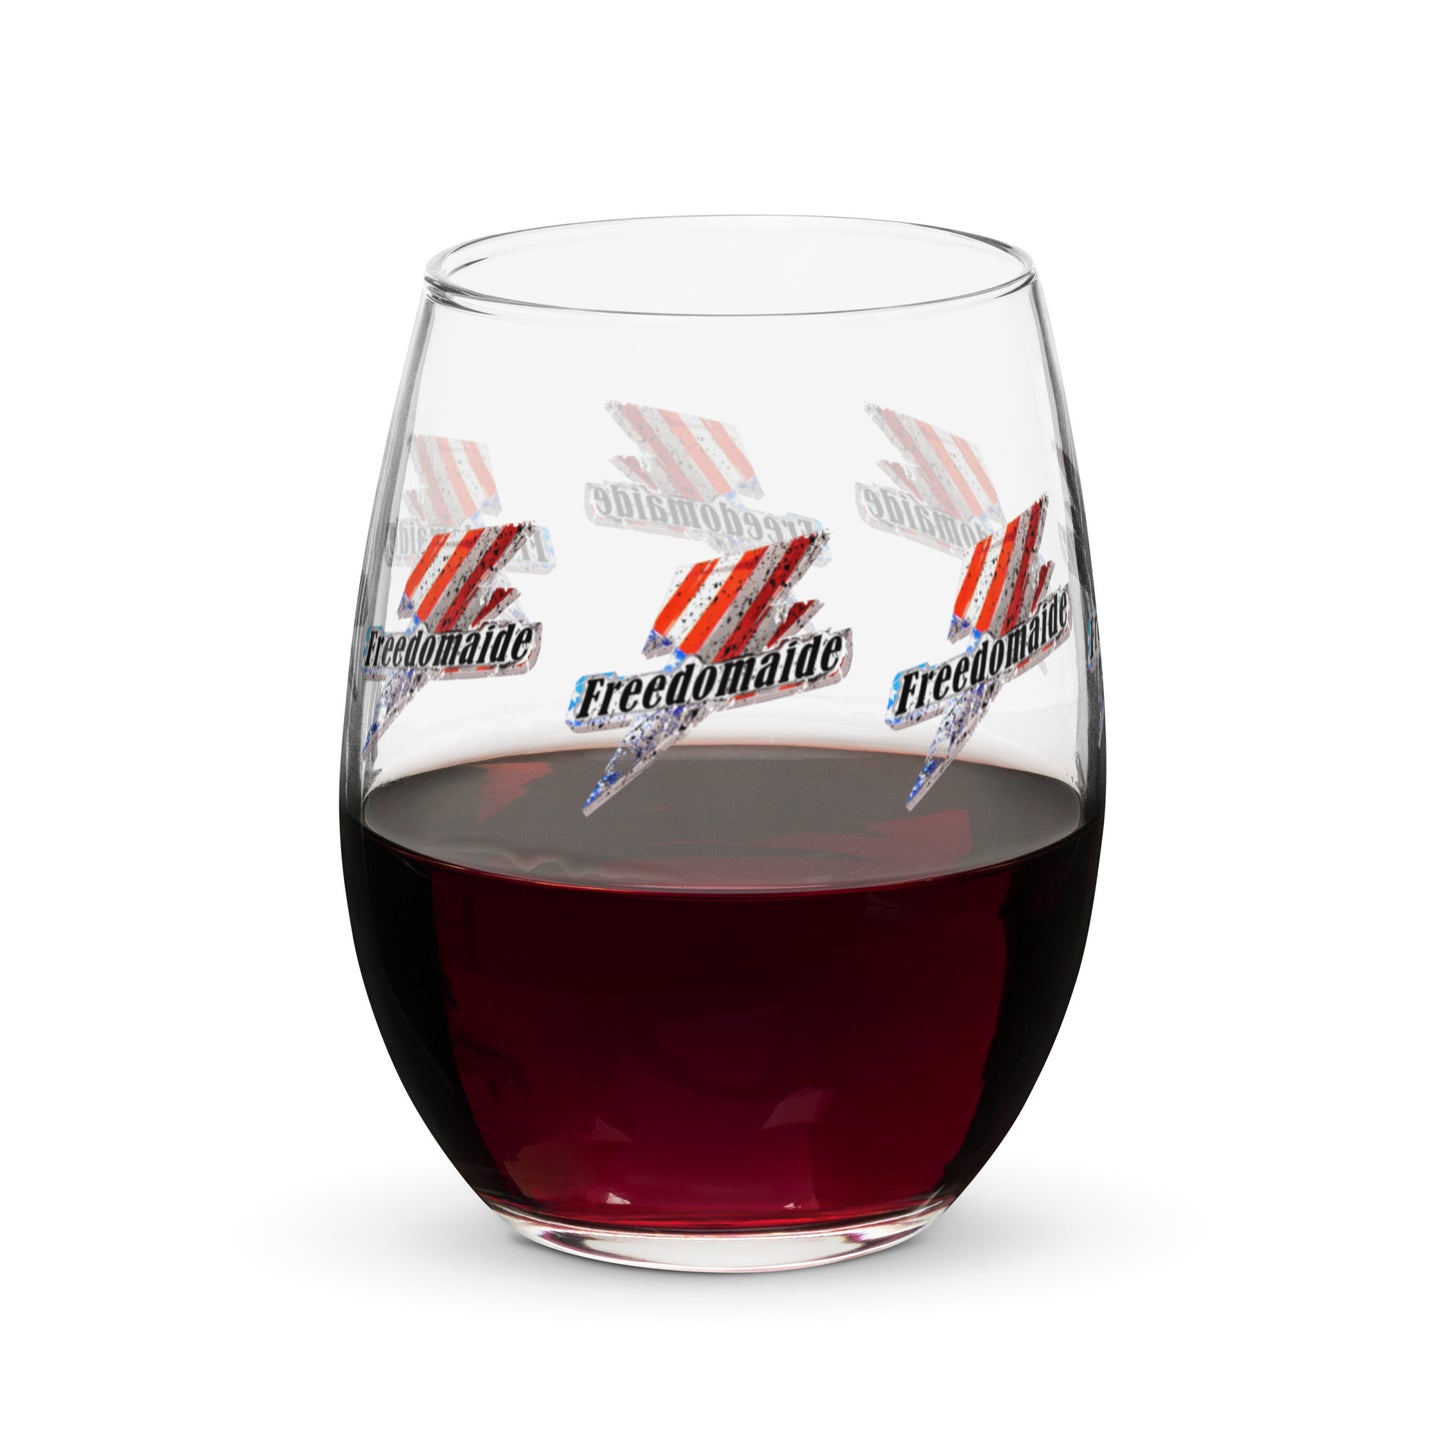 FREEDOMAIDE Stemless wine glass